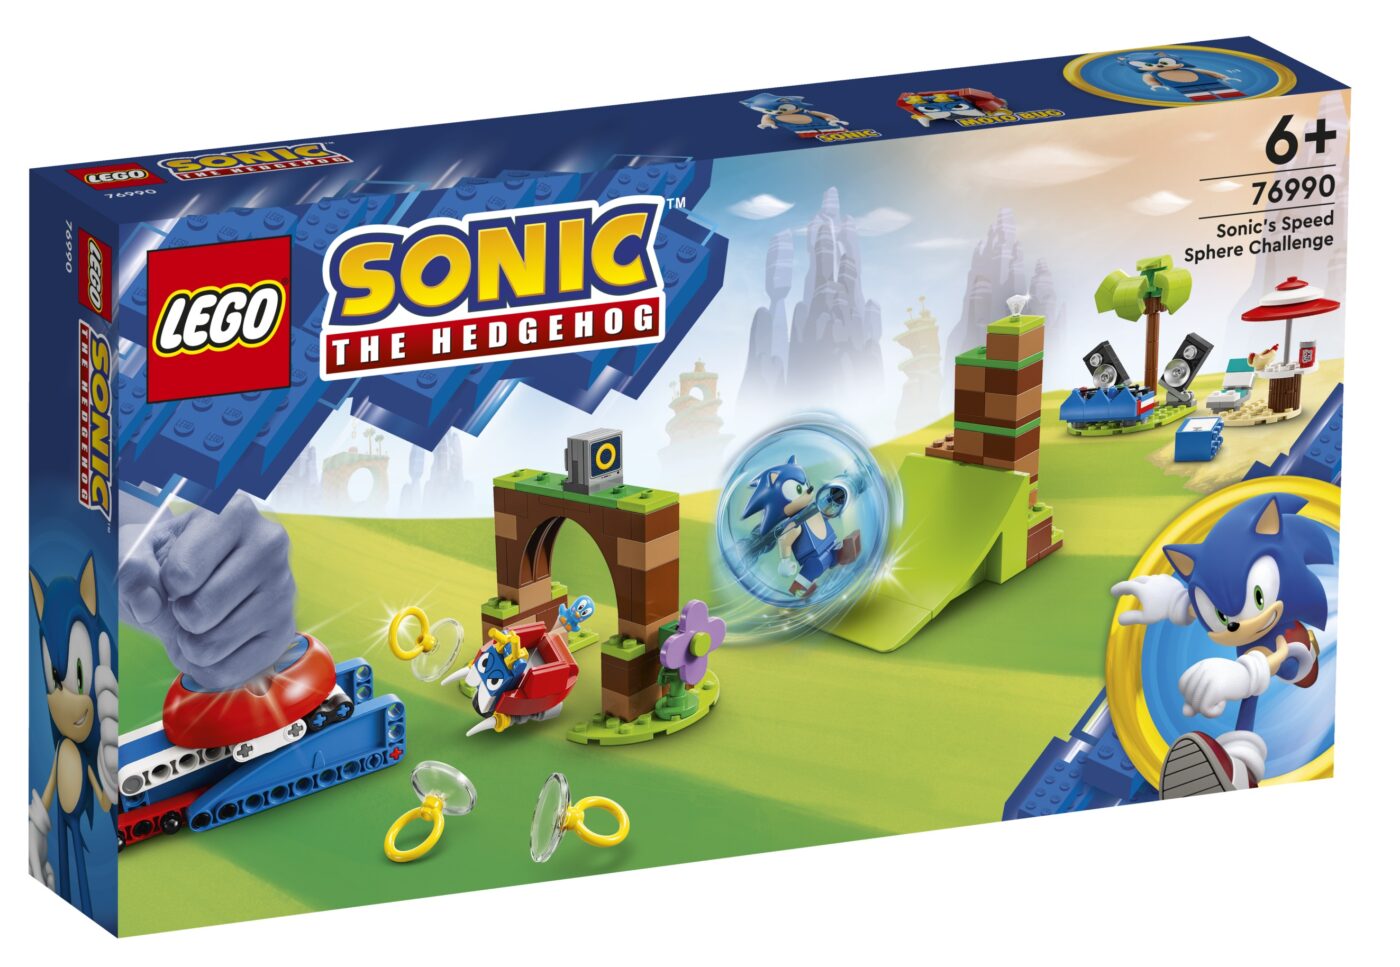 LEGO Sonic the Hedgehog Theme Announced - Four Sets in 2023 - The Brick Fan